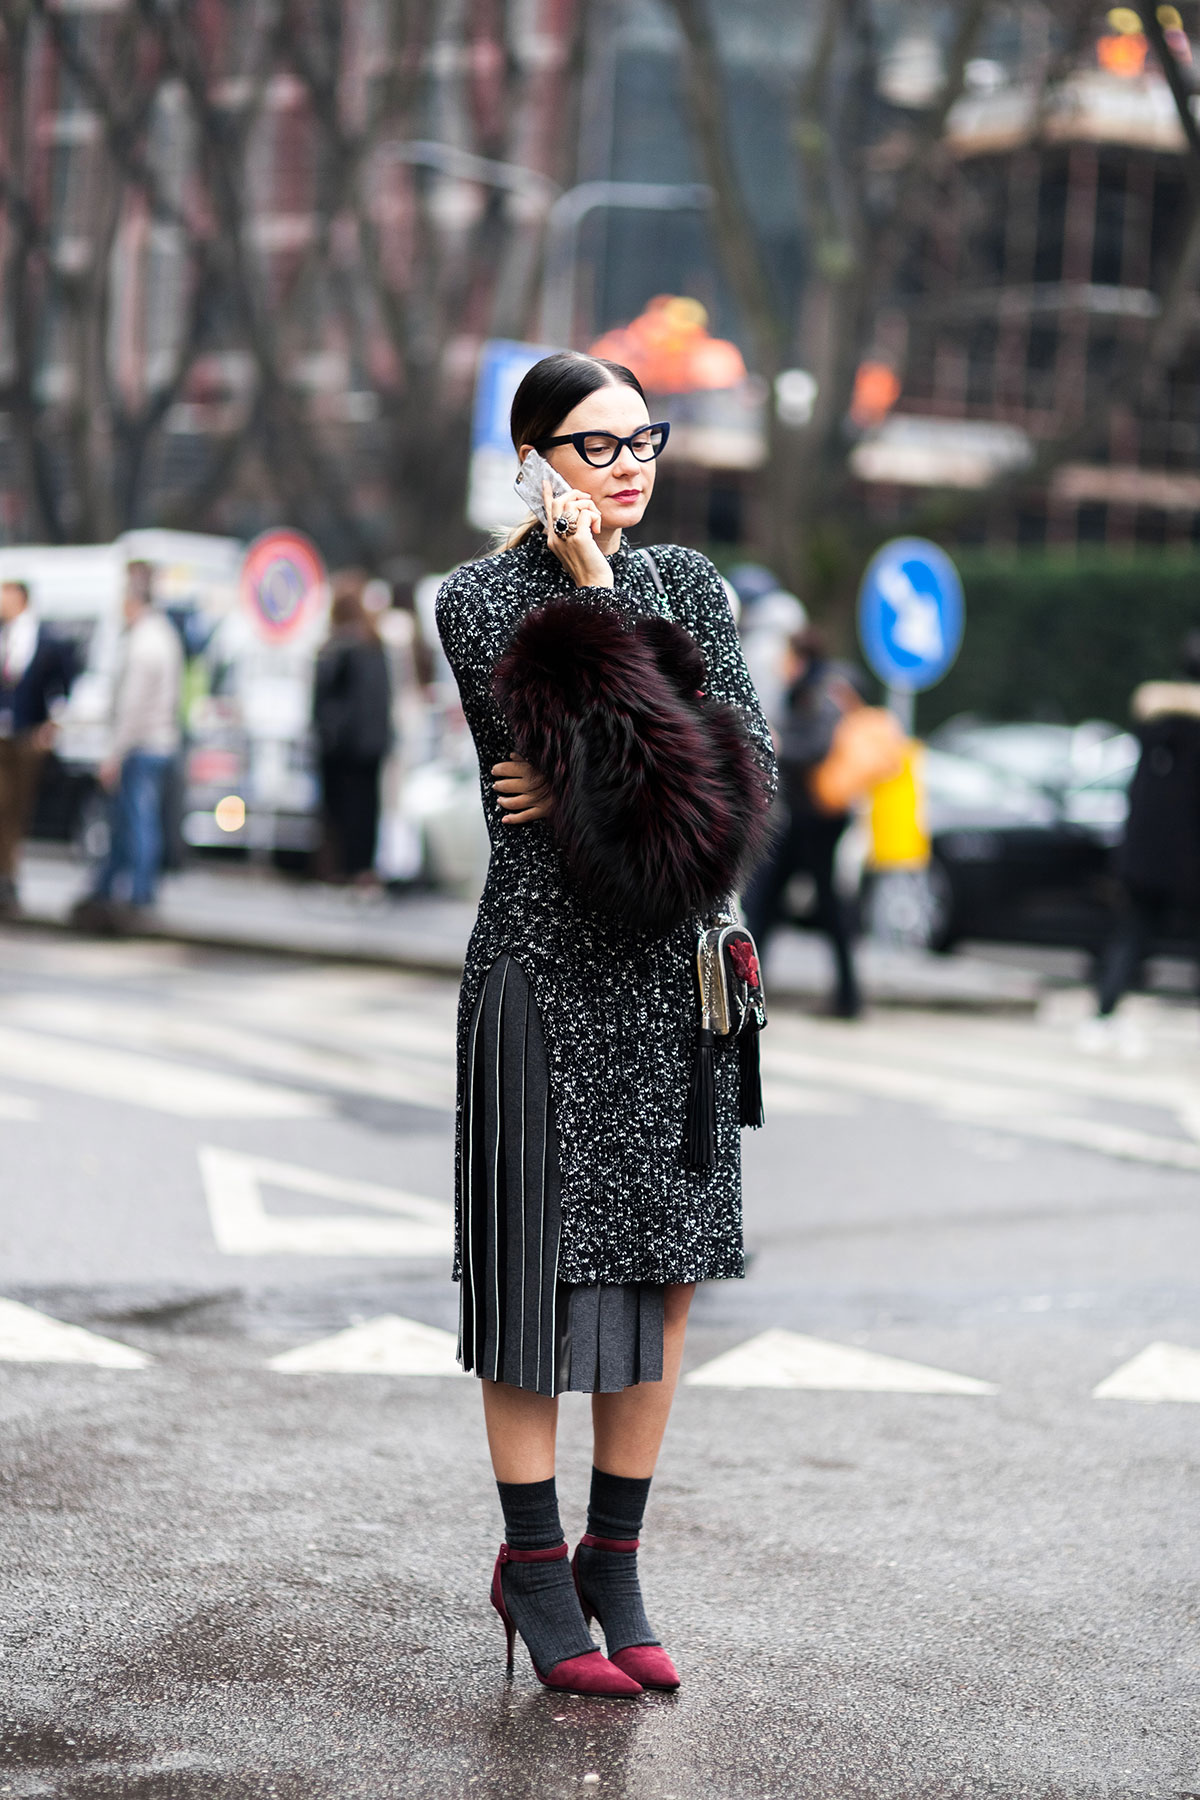 Woman wearing pleated skirt, heels and socks after the Armani Fall/Winter 2015-2016 fashion show in Milan, Italy